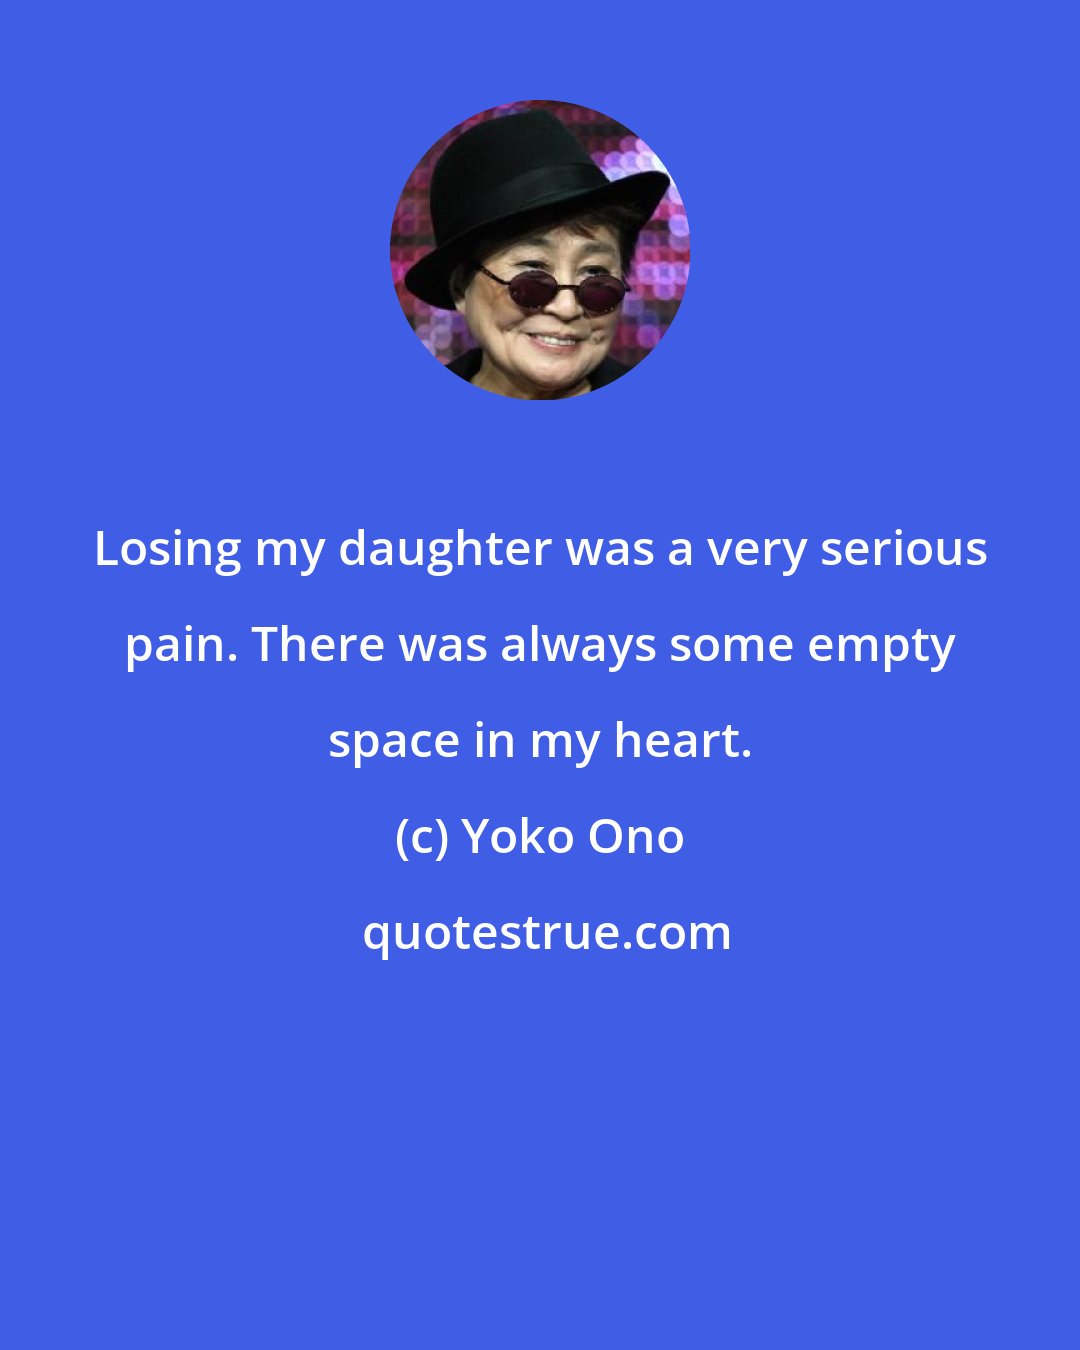 Yoko Ono: Losing my daughter was a very serious pain. There was always some empty space in my heart.